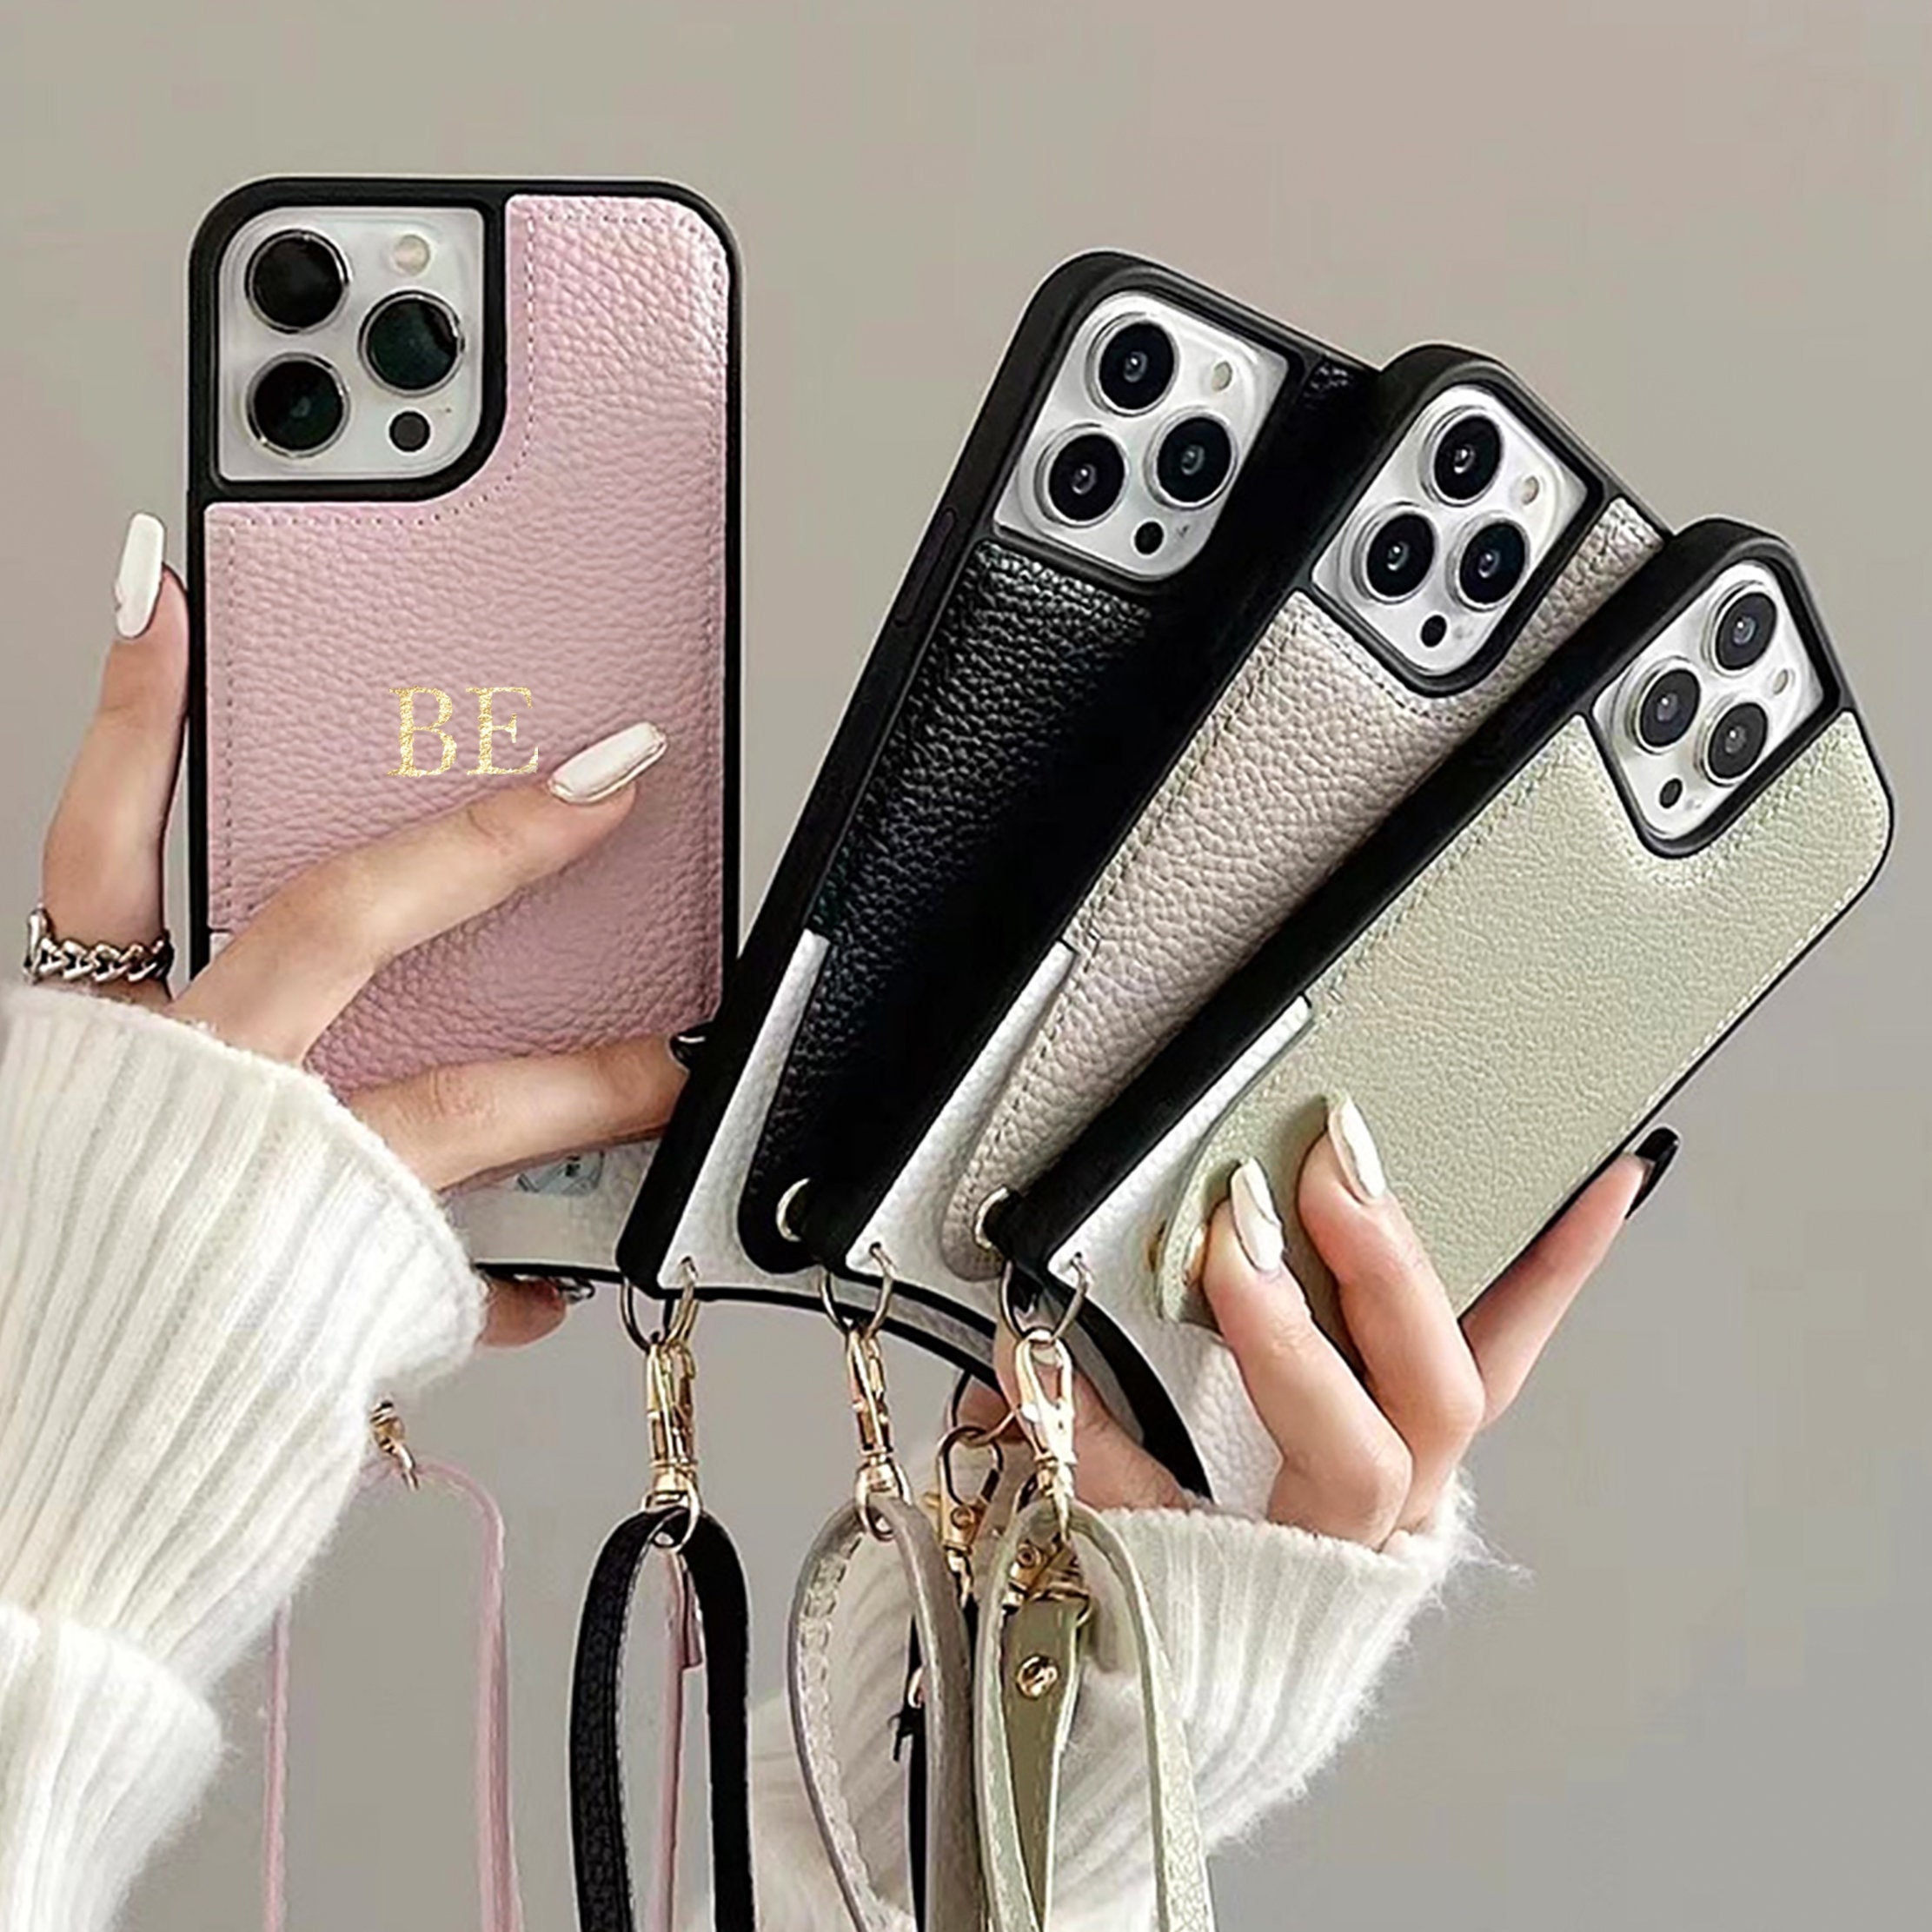  Women Crossbody Cell Phone Bag Small Shoulder Purse Leather  Travel RFID Card Slots Wallet Case Handbag Phone Pocket Baggap Clutch for  iPhone 11 Se 2020 11 Pro Xr X Xs Max